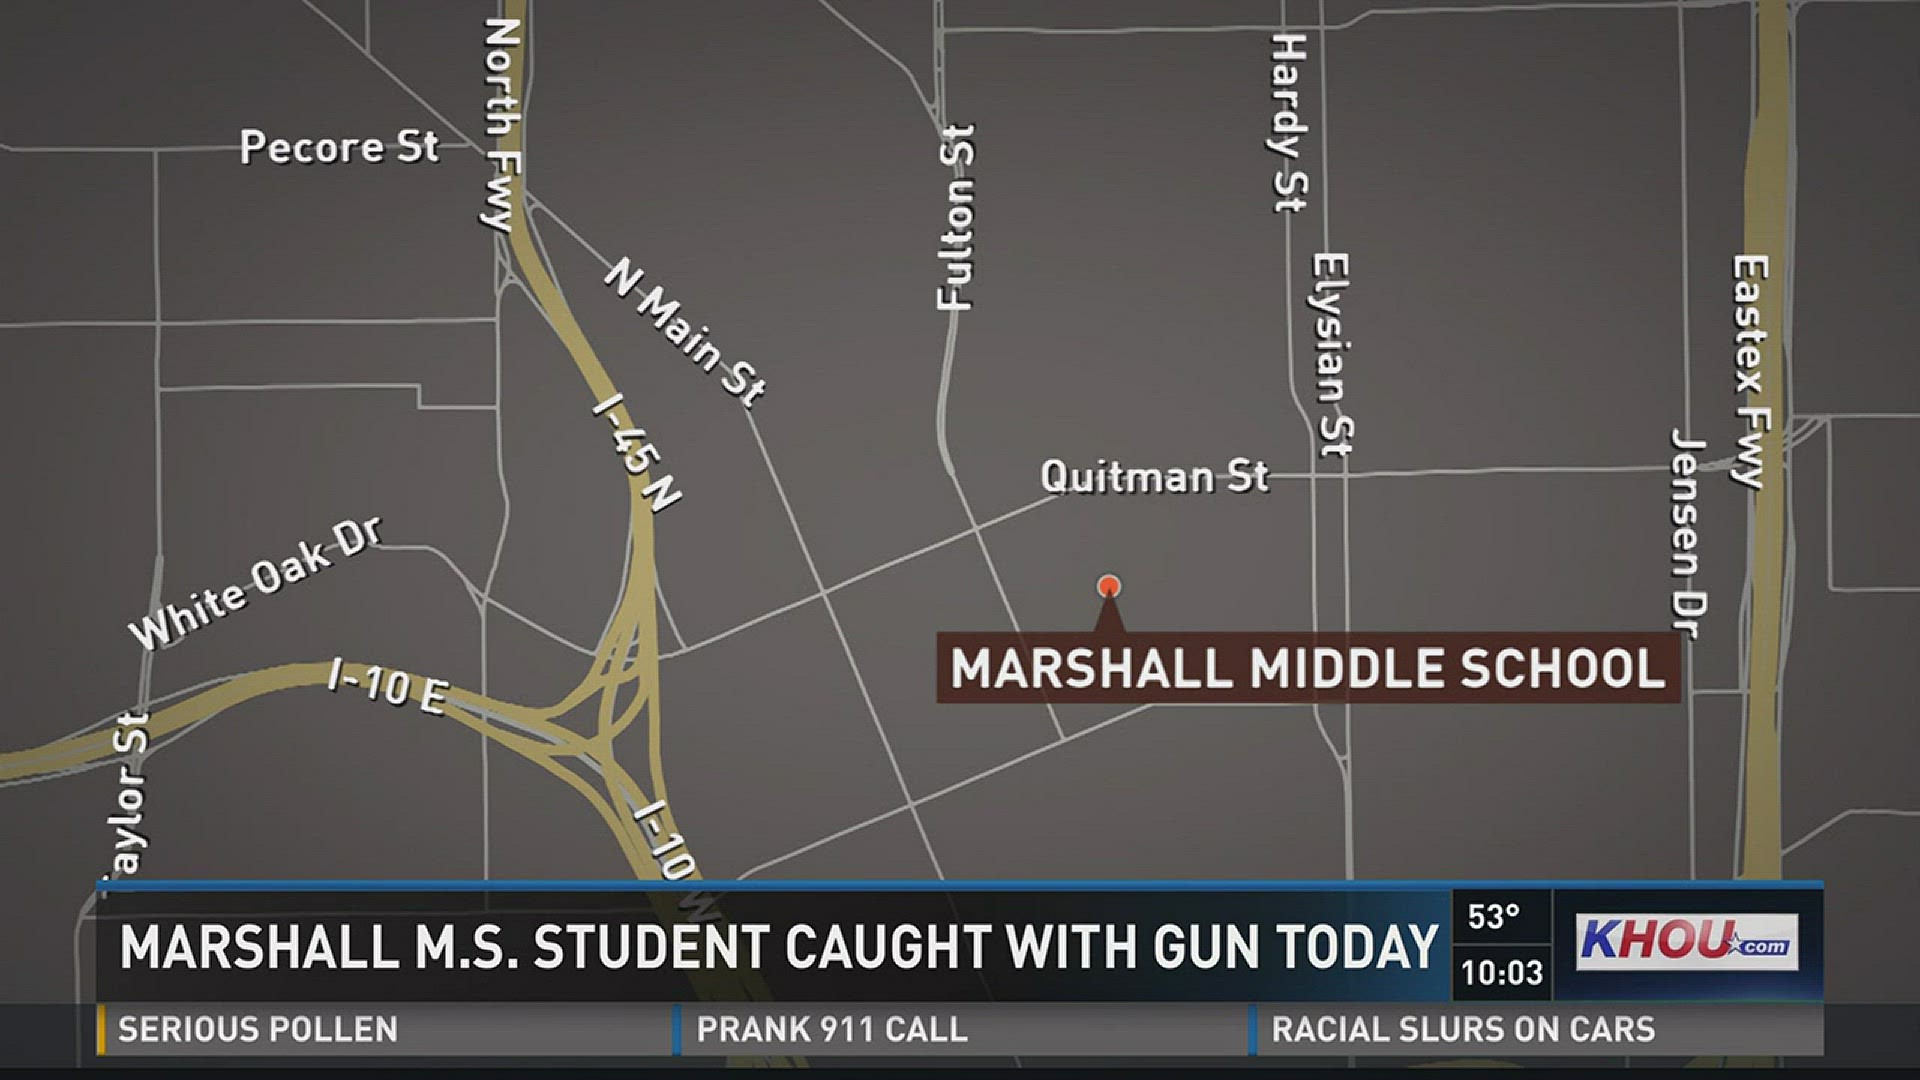 An eighth grader was allegedly caught with a gun at Marshall Middle School Thursday.